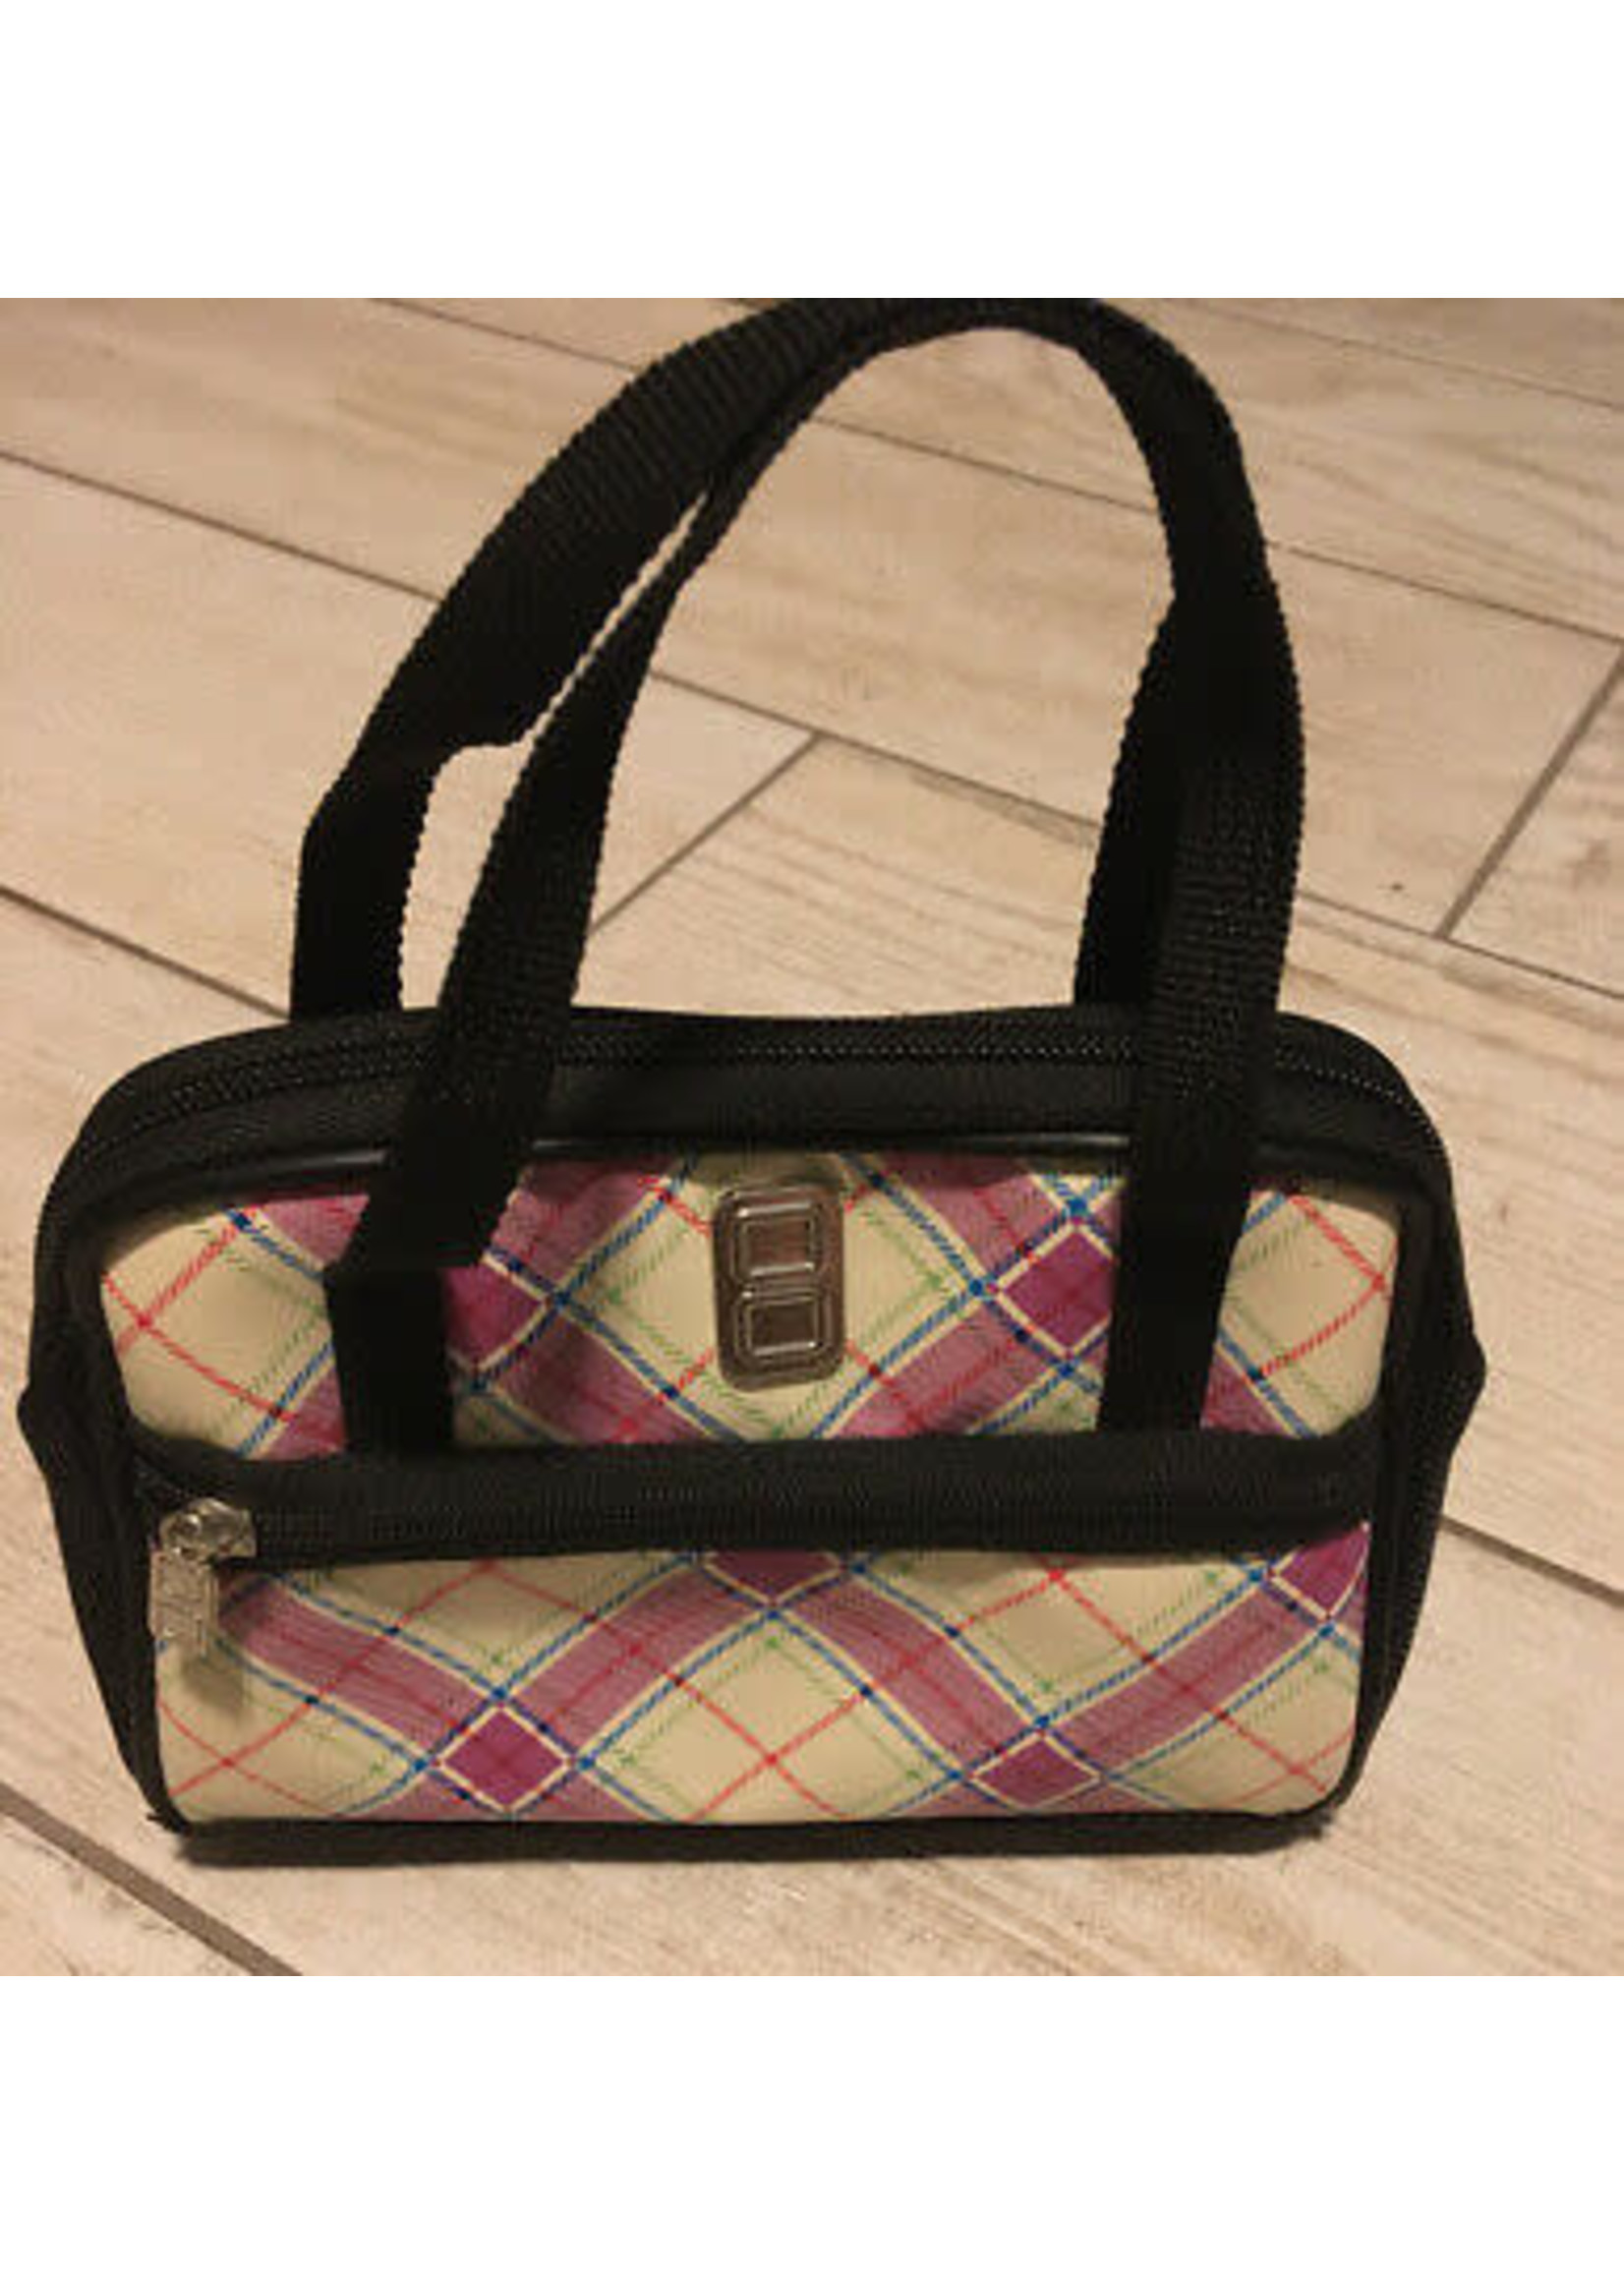 Nintendo DS Carrying Case Pink Plaid Purse